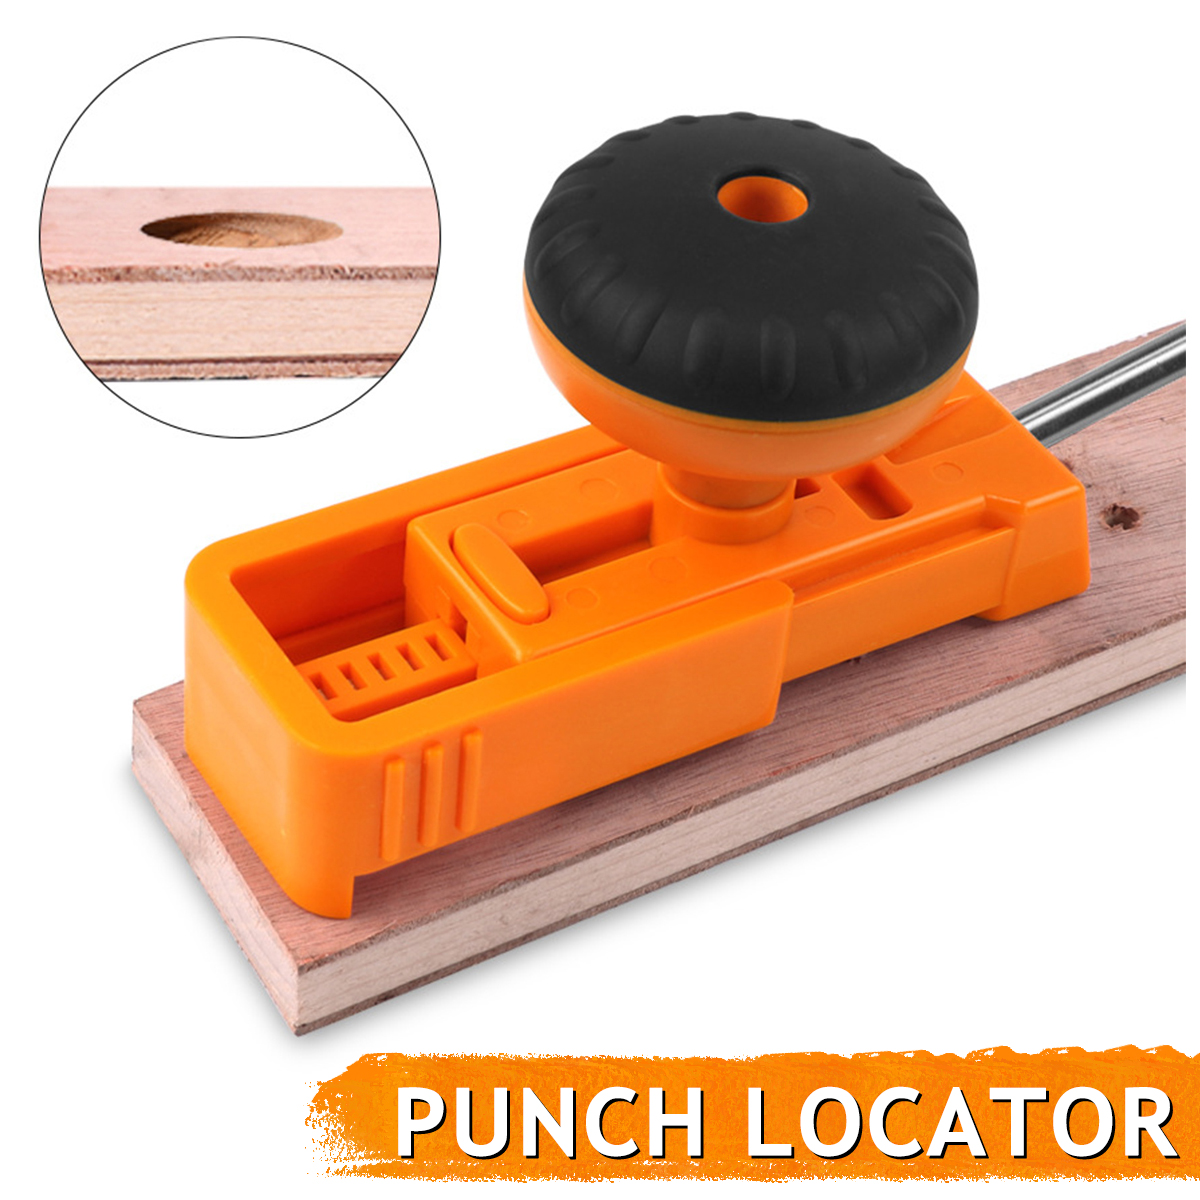 Portable-Oblique-Hole-Locator-Positioning-Drill-Guide-Jig-Set-for-Woodworking-Drilling-1625515-1